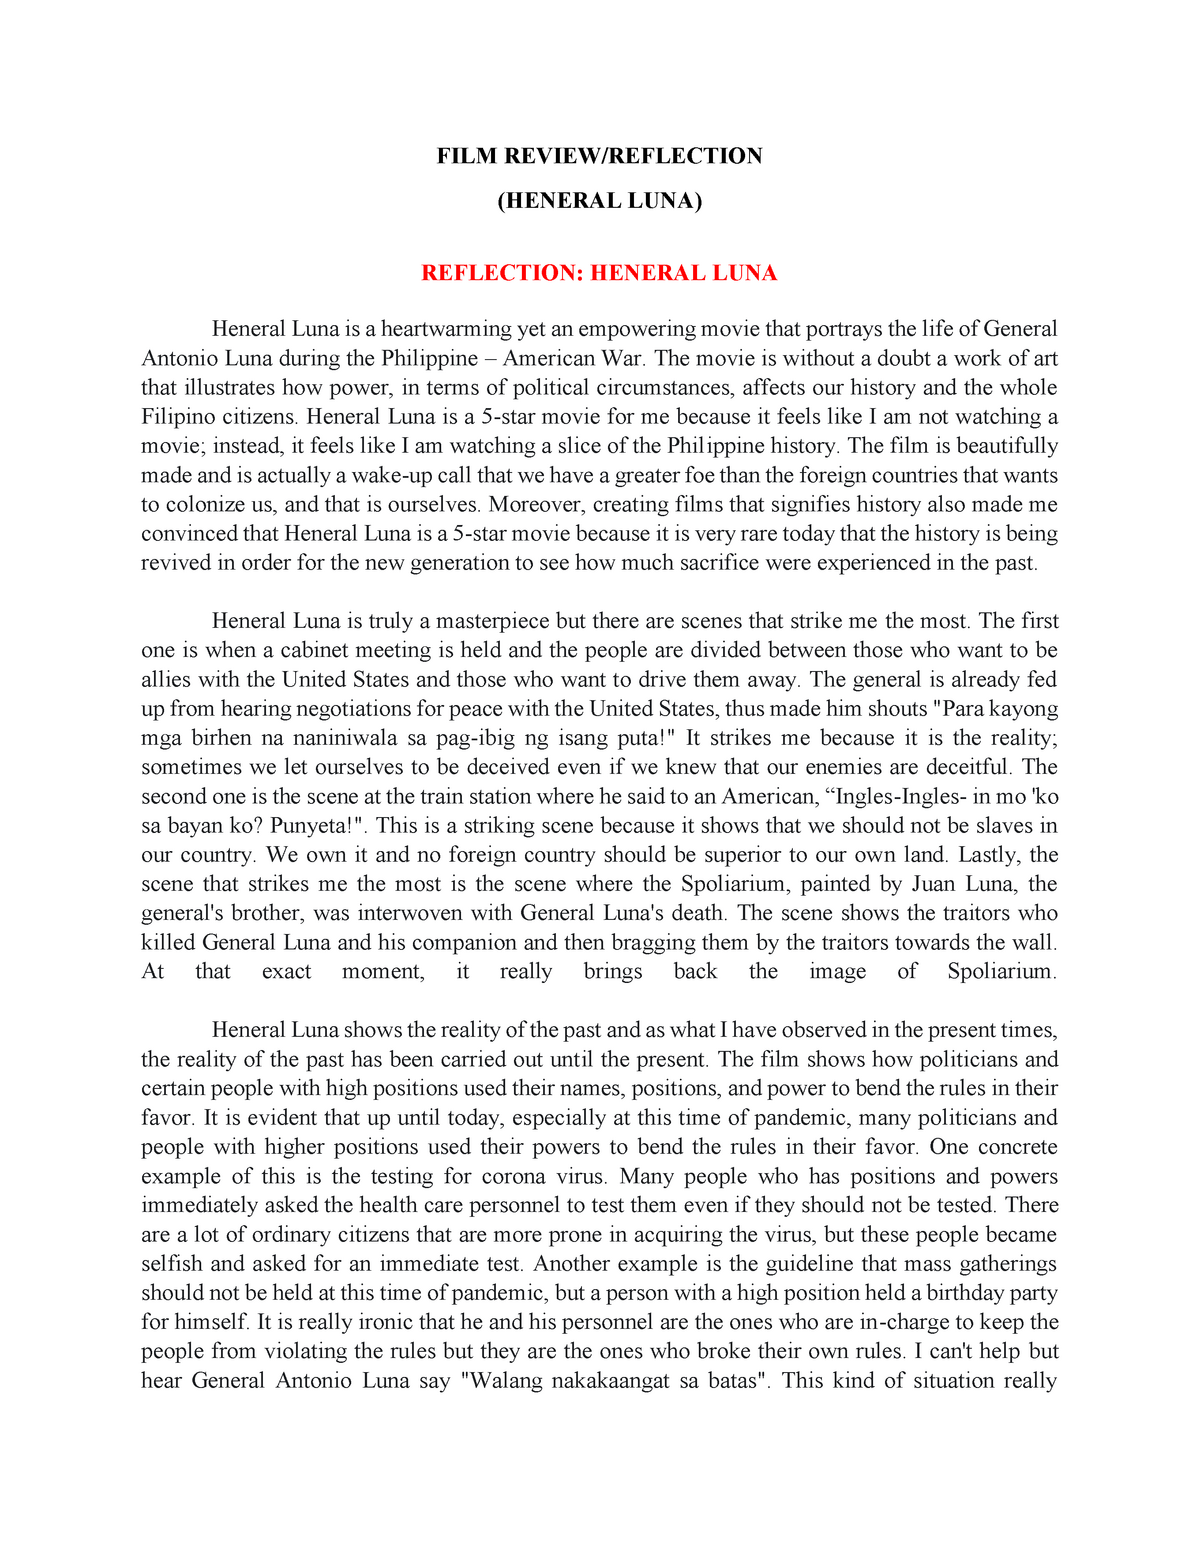 reaction paper about heneral luna movie review